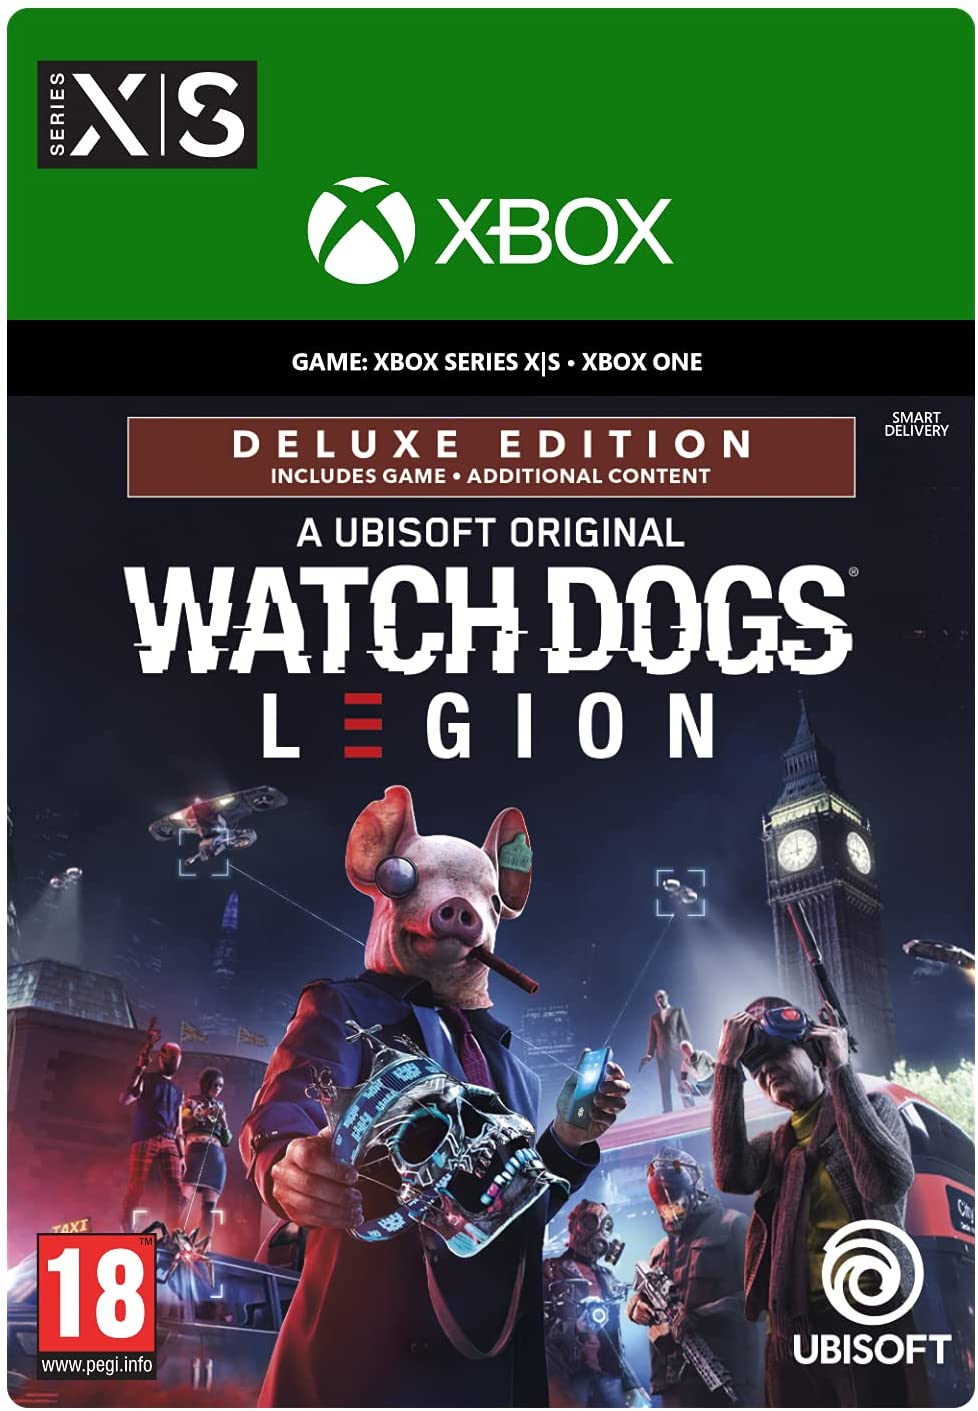 Watch Dogs: Legion - Deluxe Edition VPN ACTIVATED Key (Xbox) - 